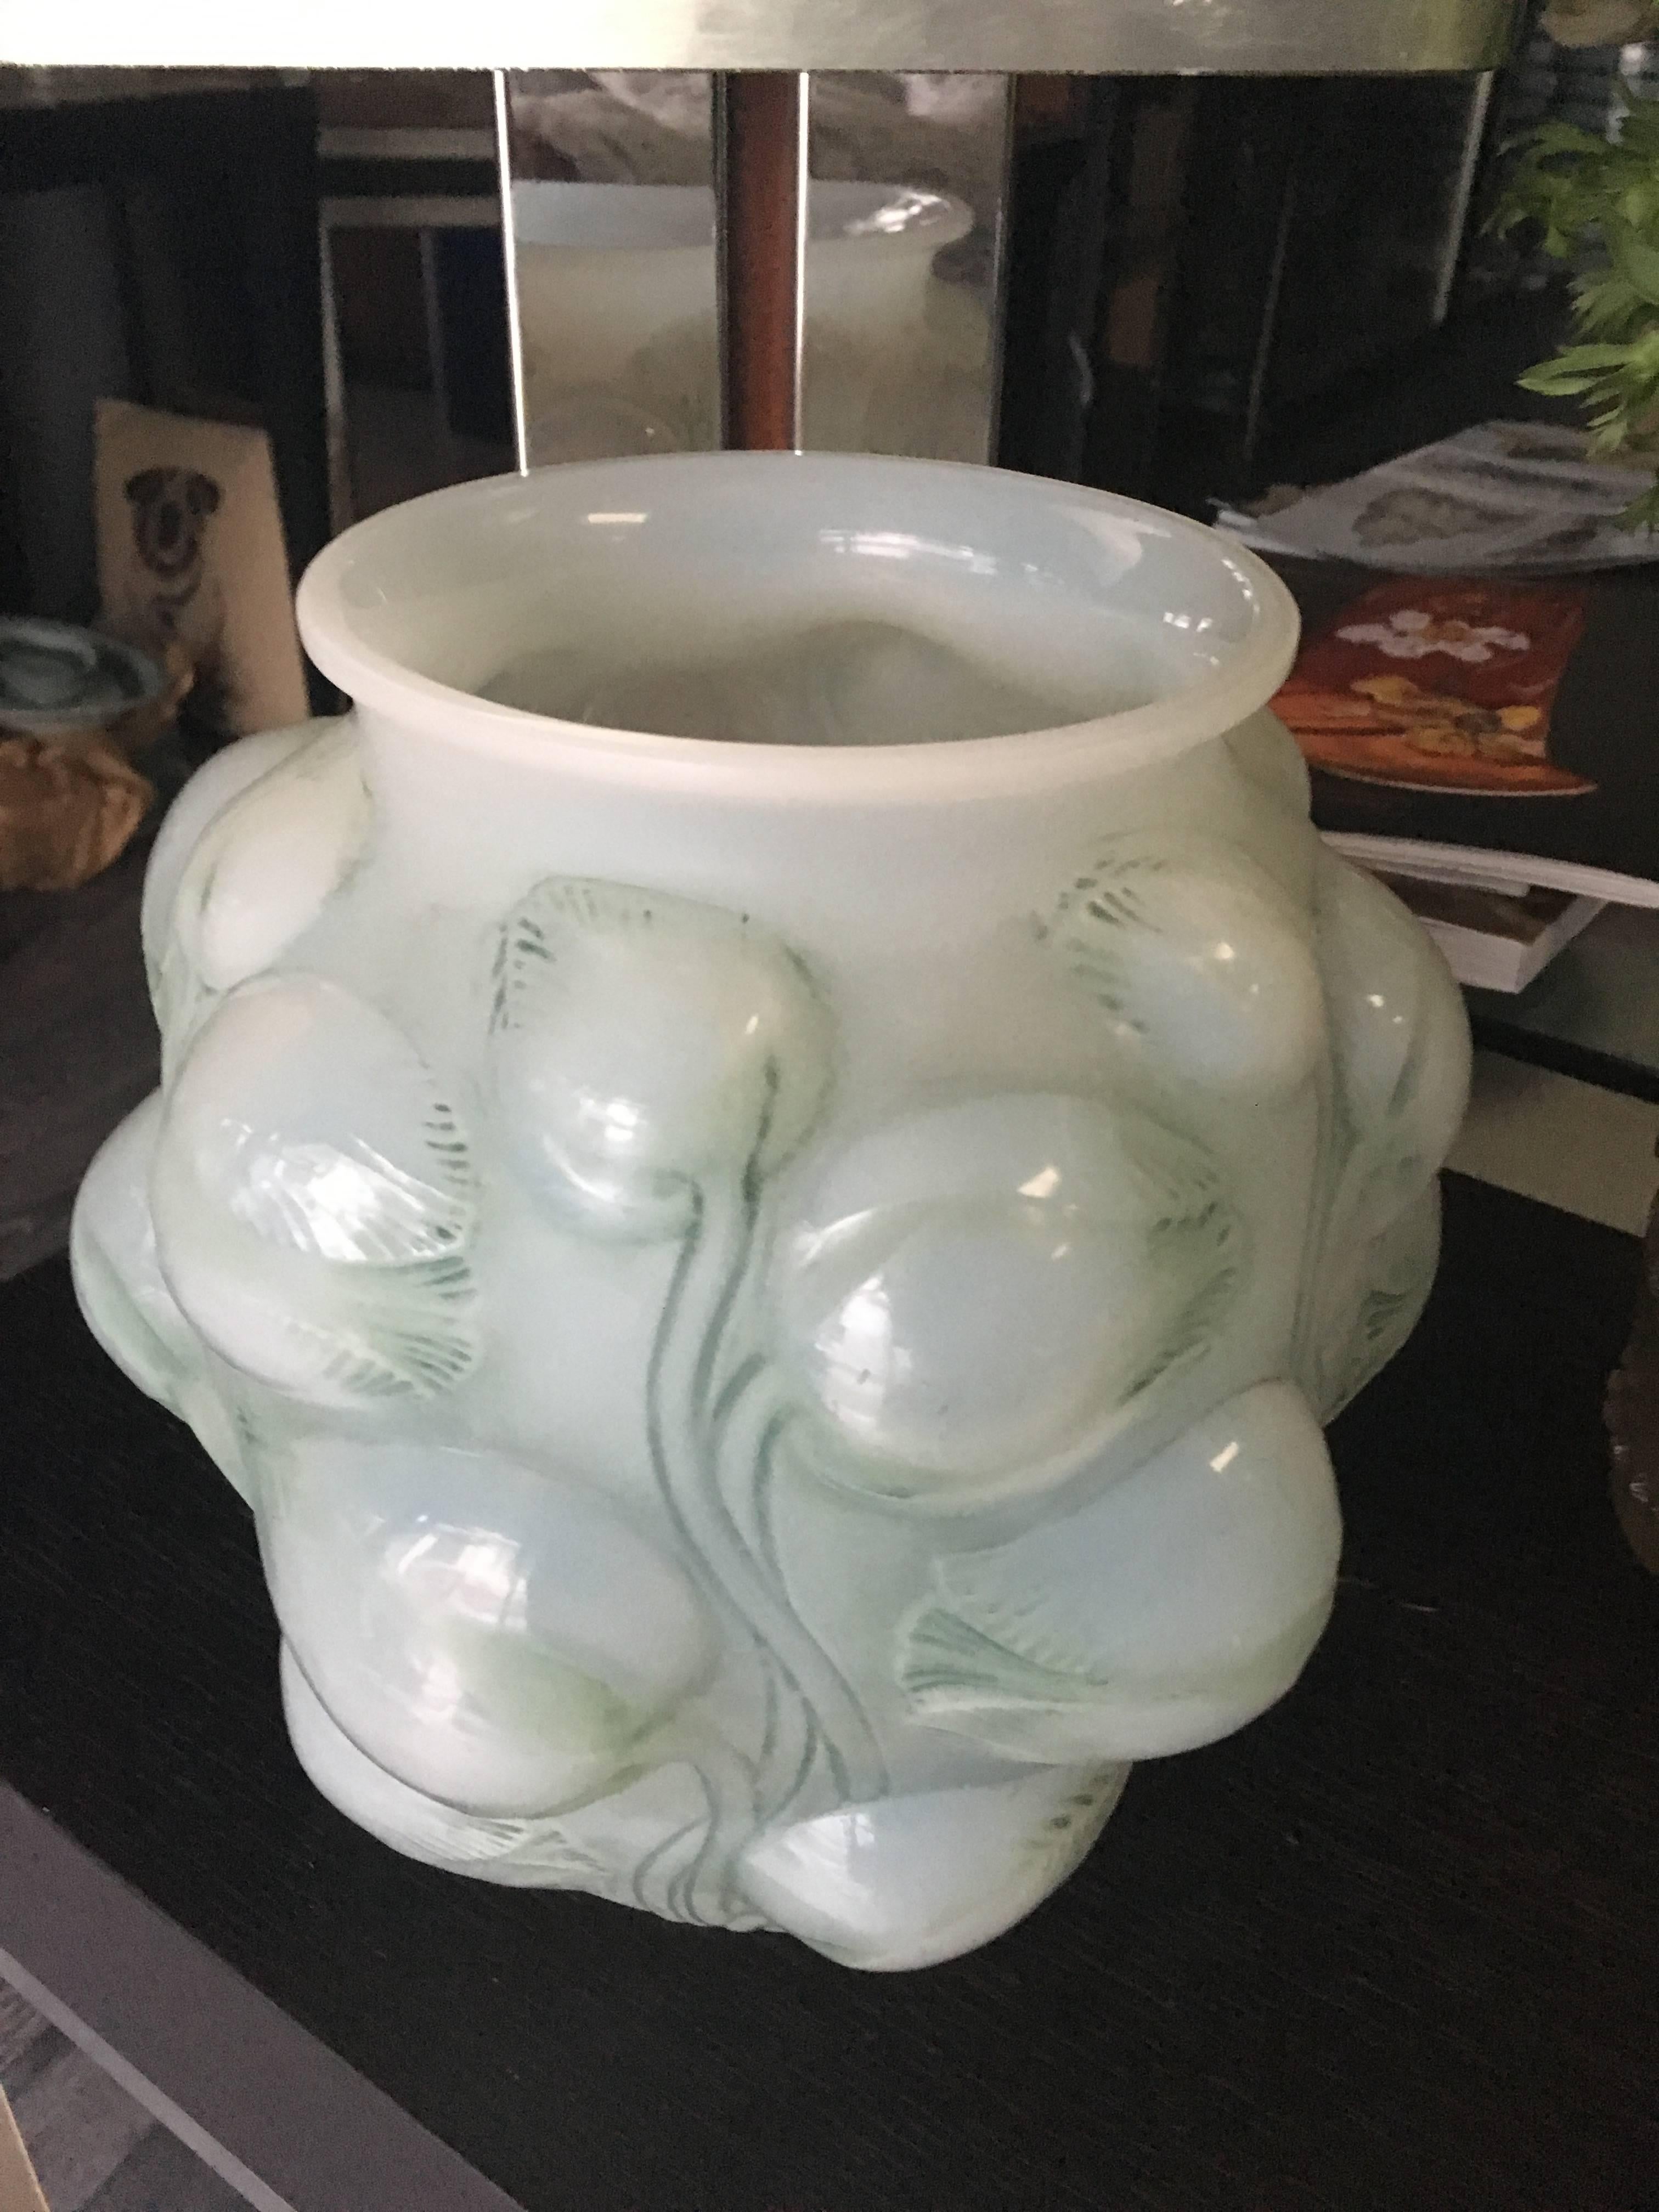 White opalescent roughly mold blown glass with a design of high relief blue or green patinated tulips molded all around the exterior.
 
 Bibliographie: Fe´lix Marcilhac, Rene´ Lalique - Catalogue raisonne´ de l'oeuvre de verre, Les E´ditions de